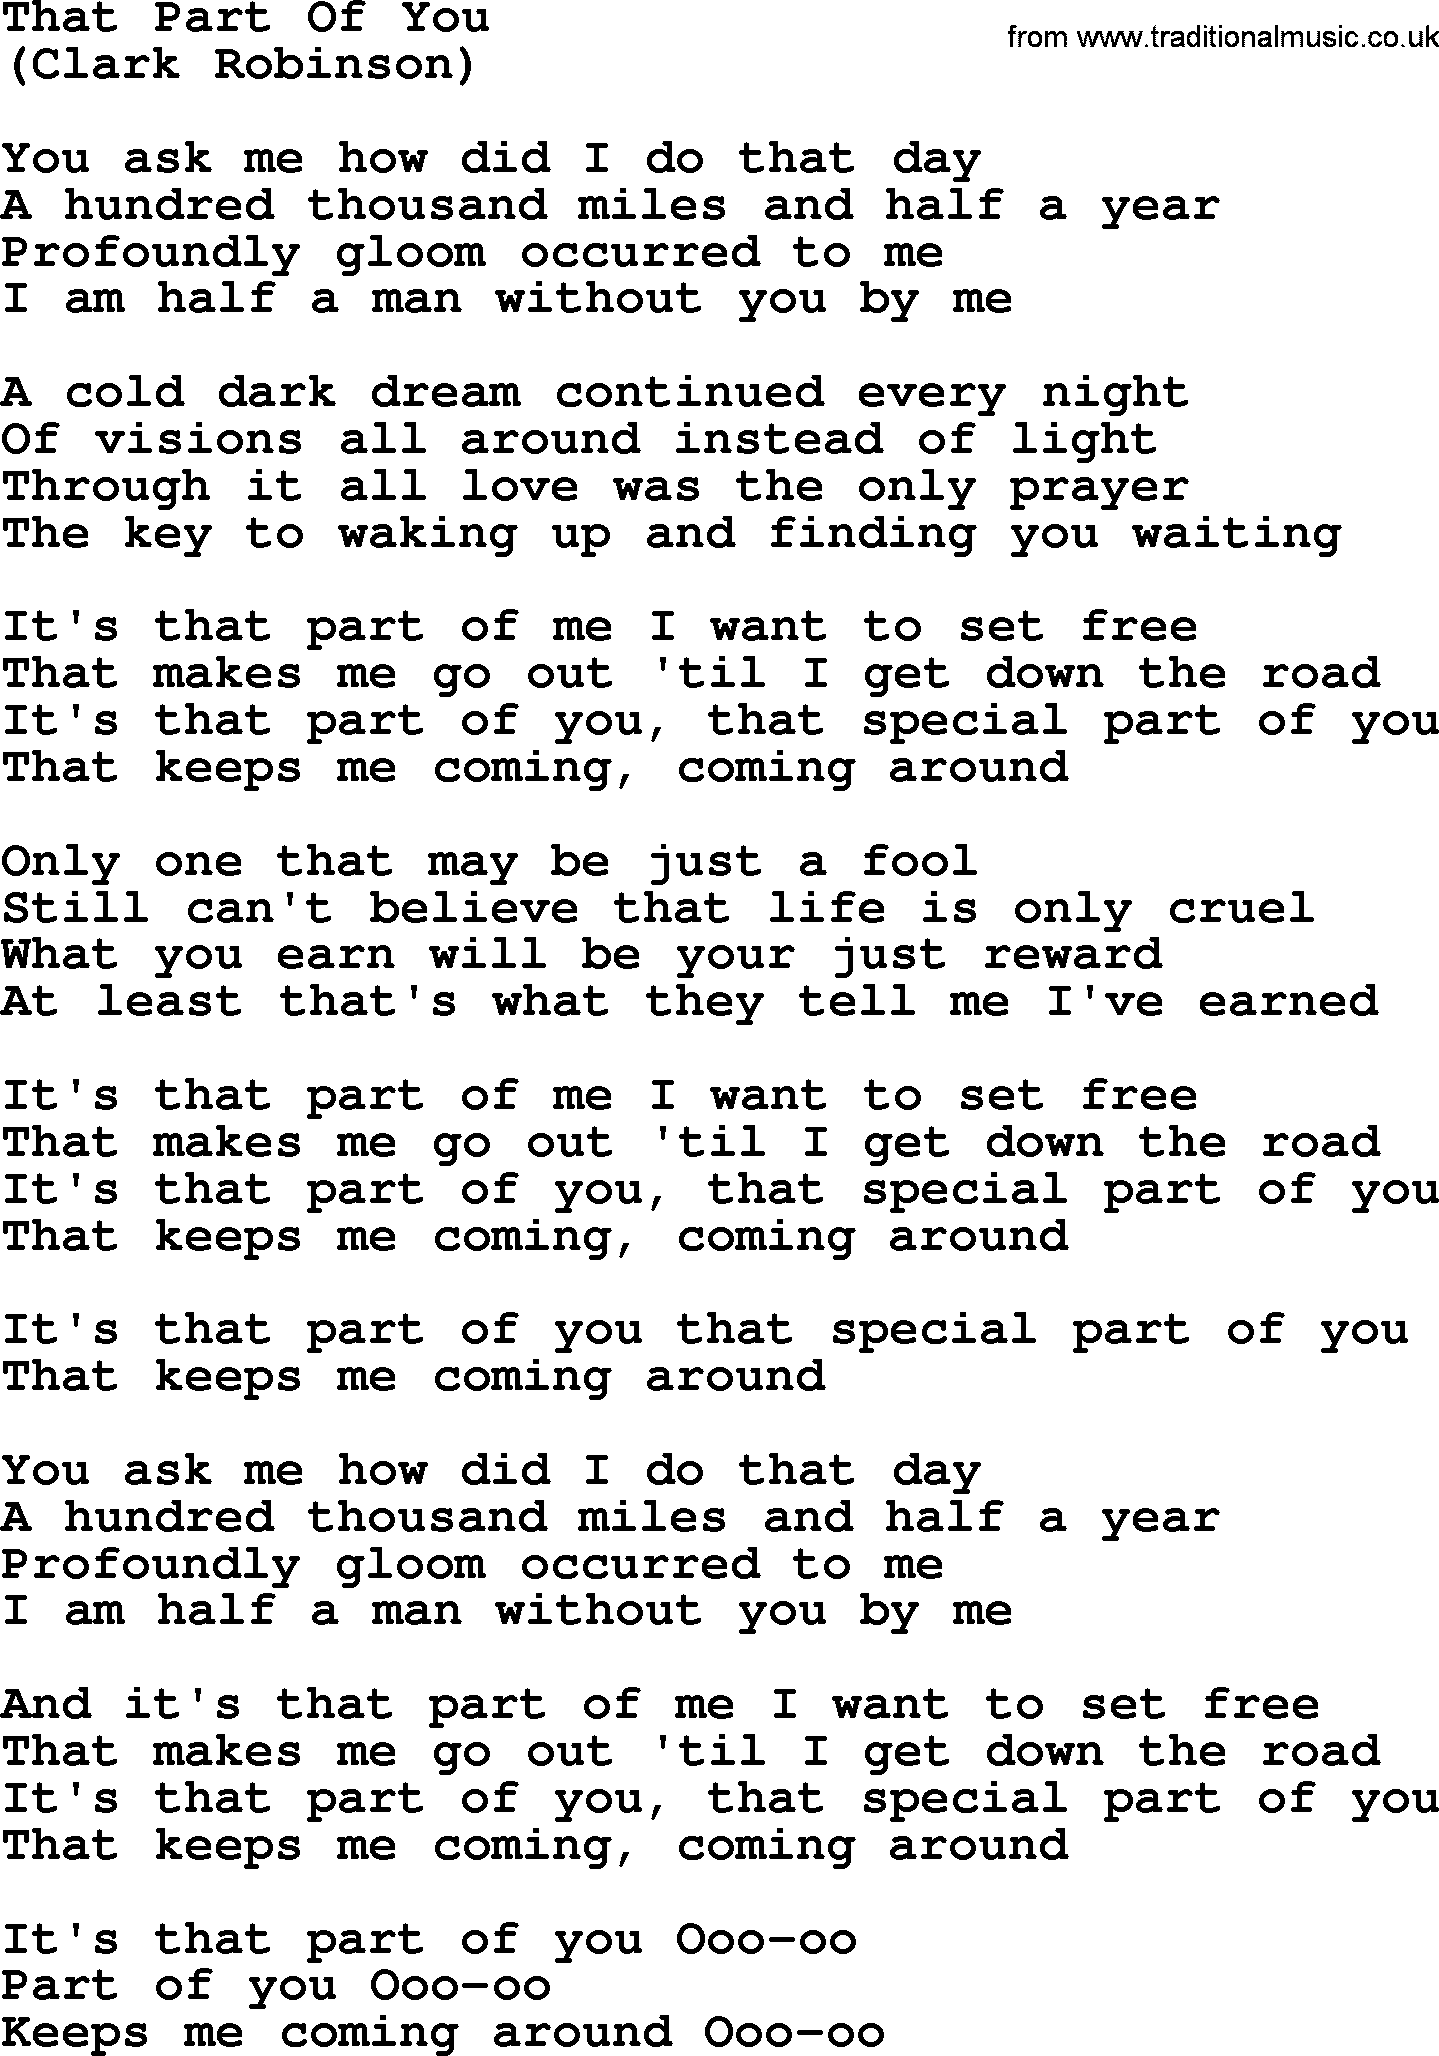 That Part Of You, by The Byrds - lyrics with pdf